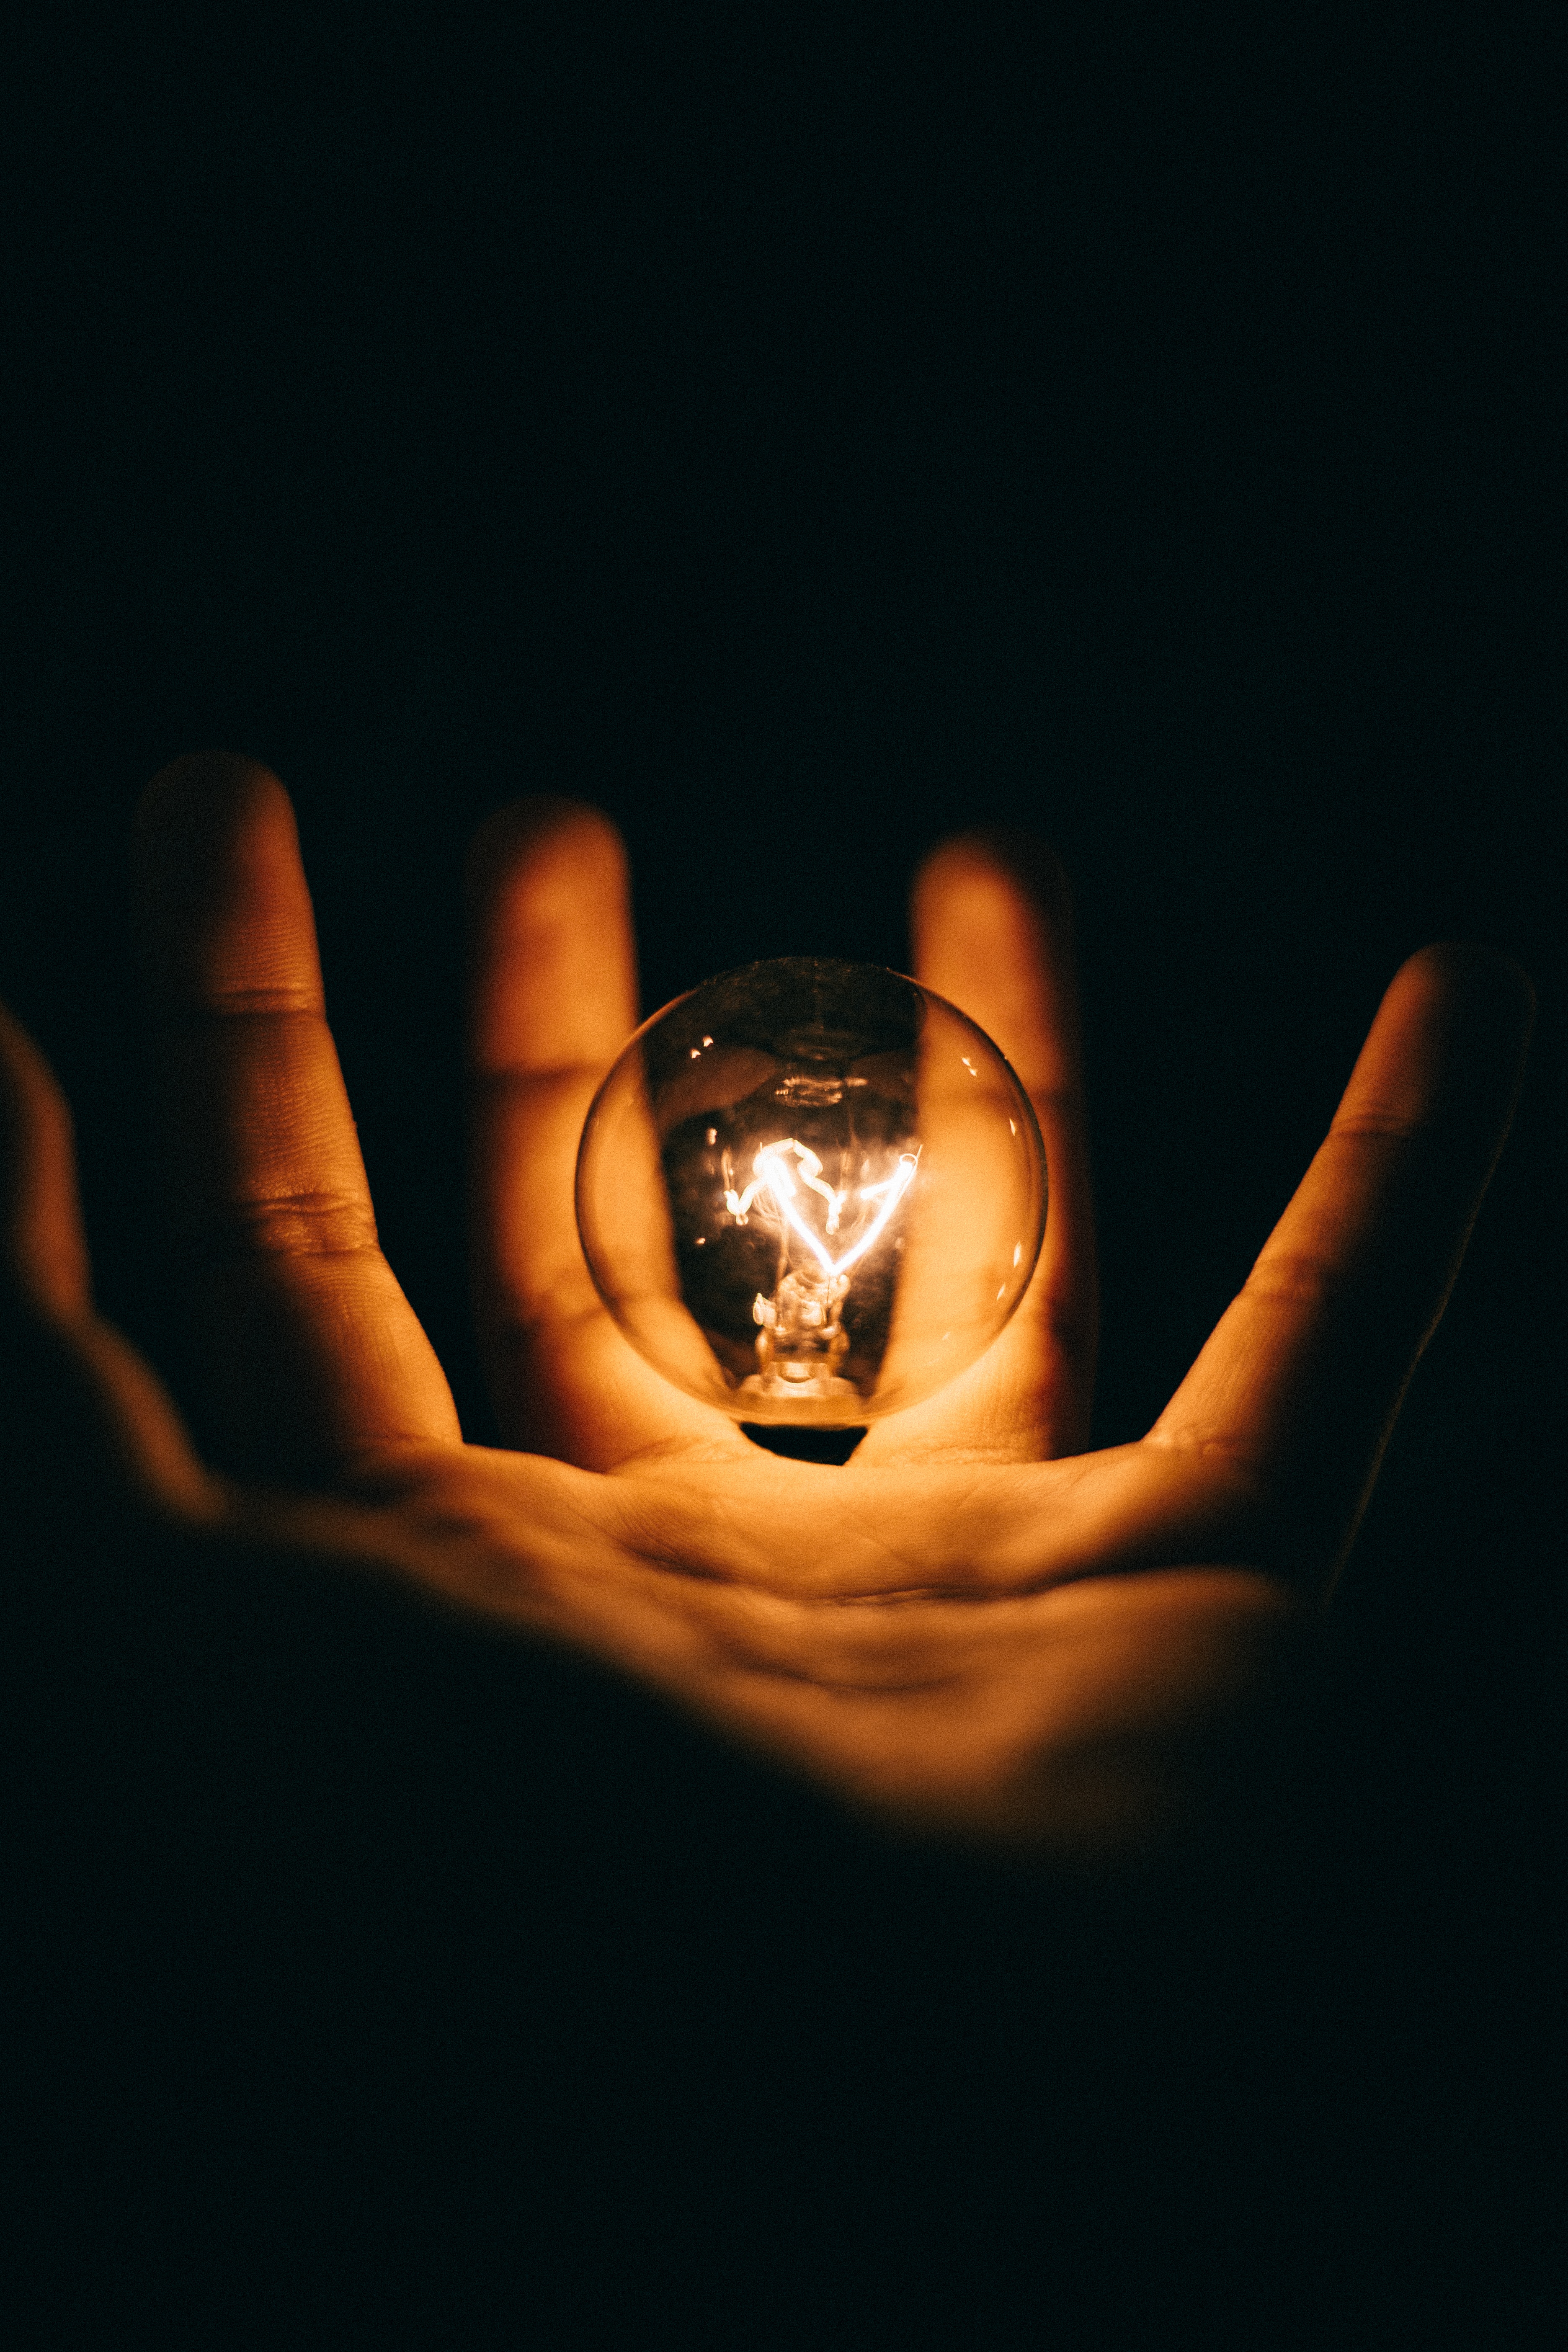 black background illuminated by floating lightbulb above an open hand